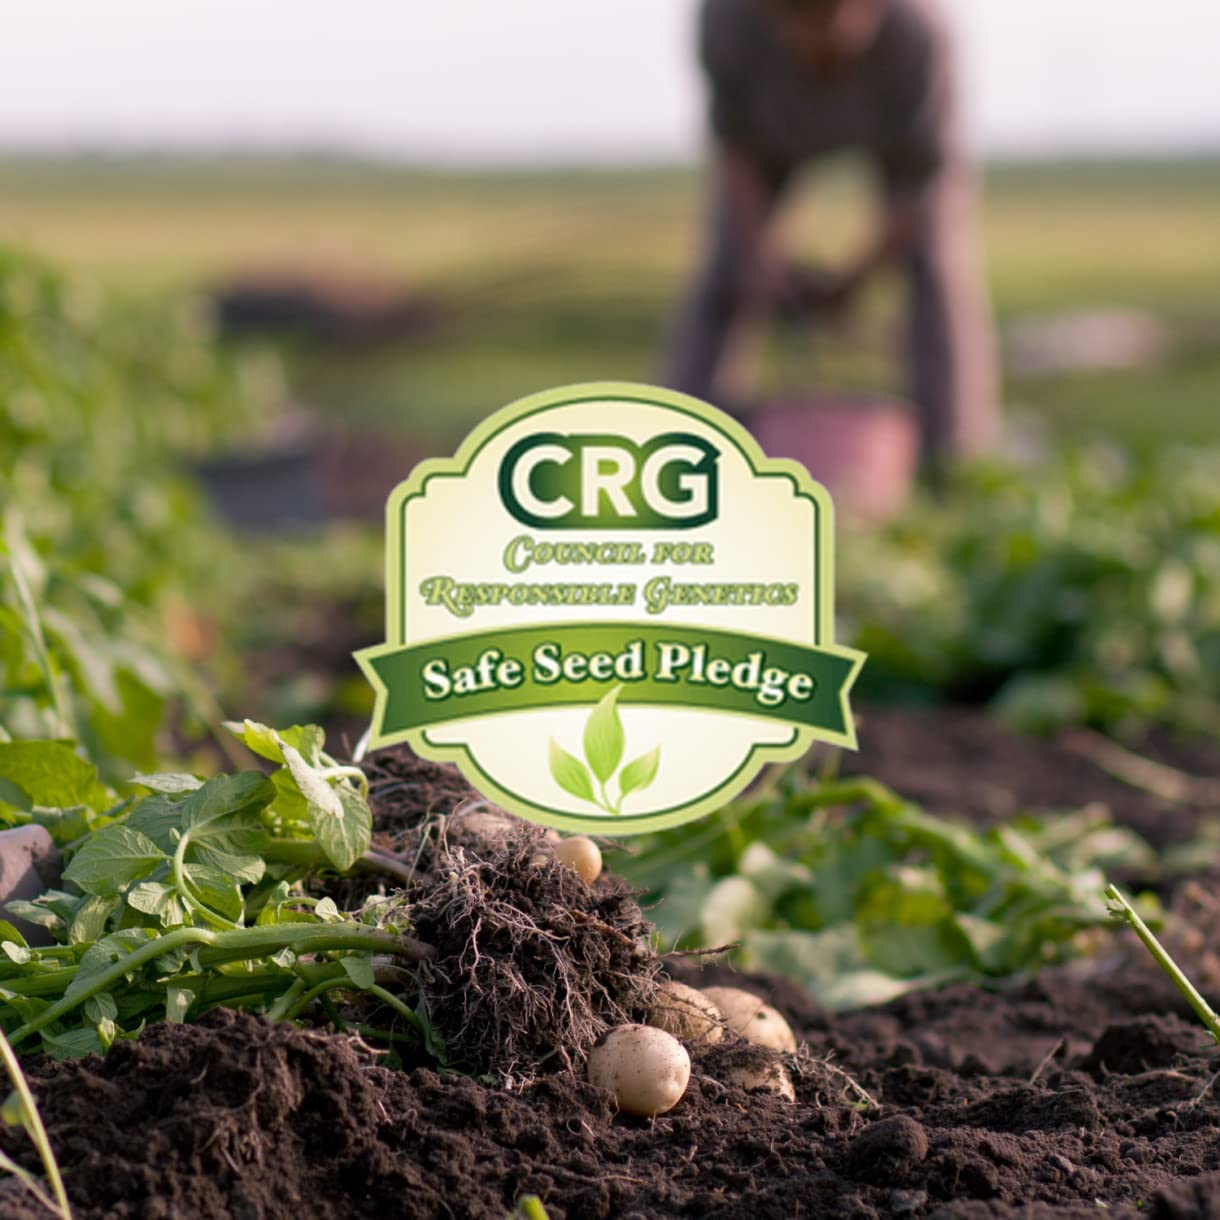 Image featuring the CRG Safe Seed Pledge logo and details, promoting commitment to safe and ethical seed practices 